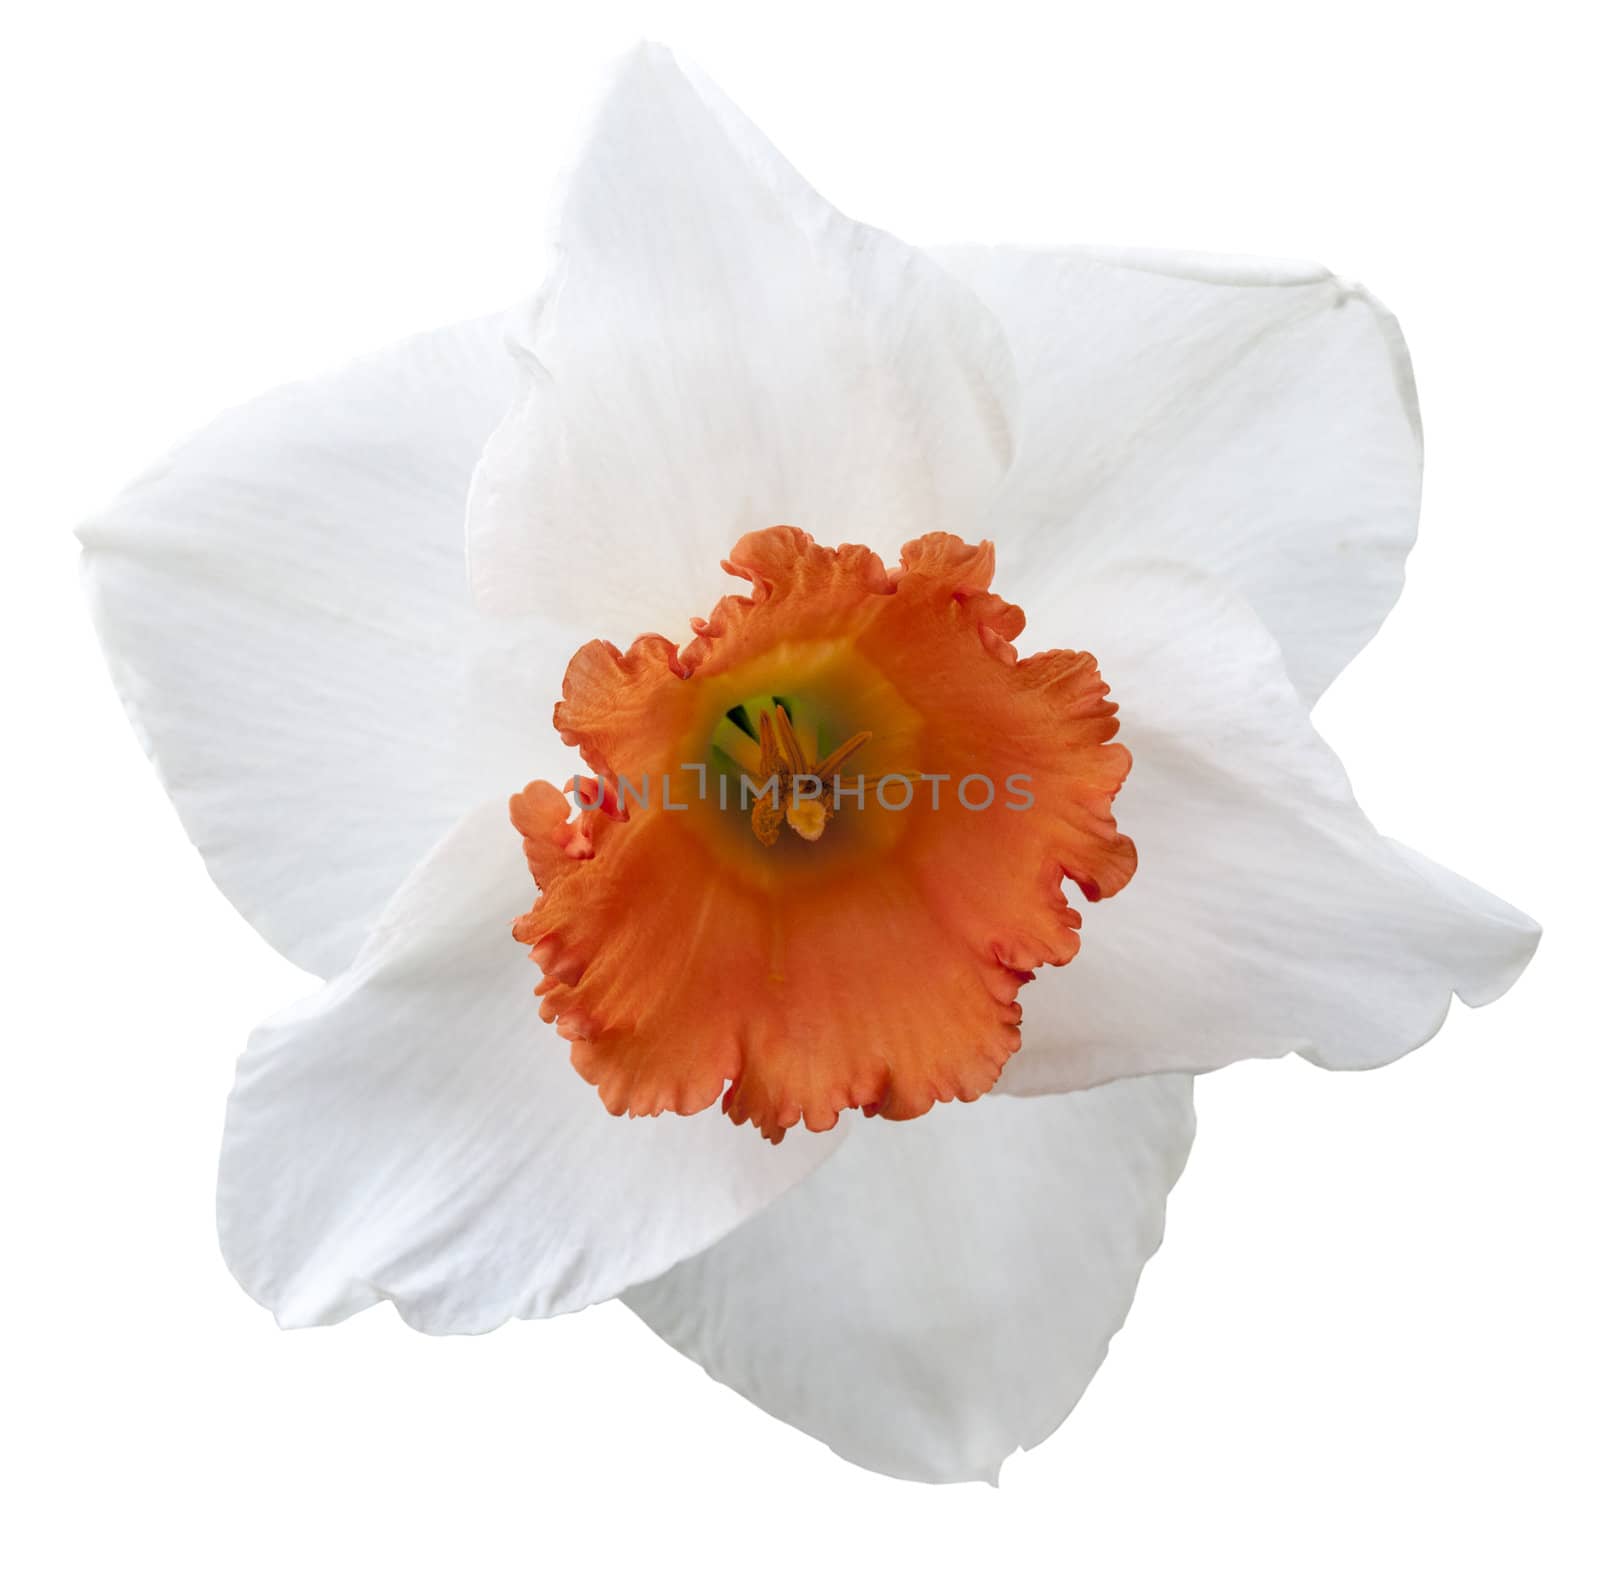 Beautiful daffodil isolated against a white background with clipping path included in the file.